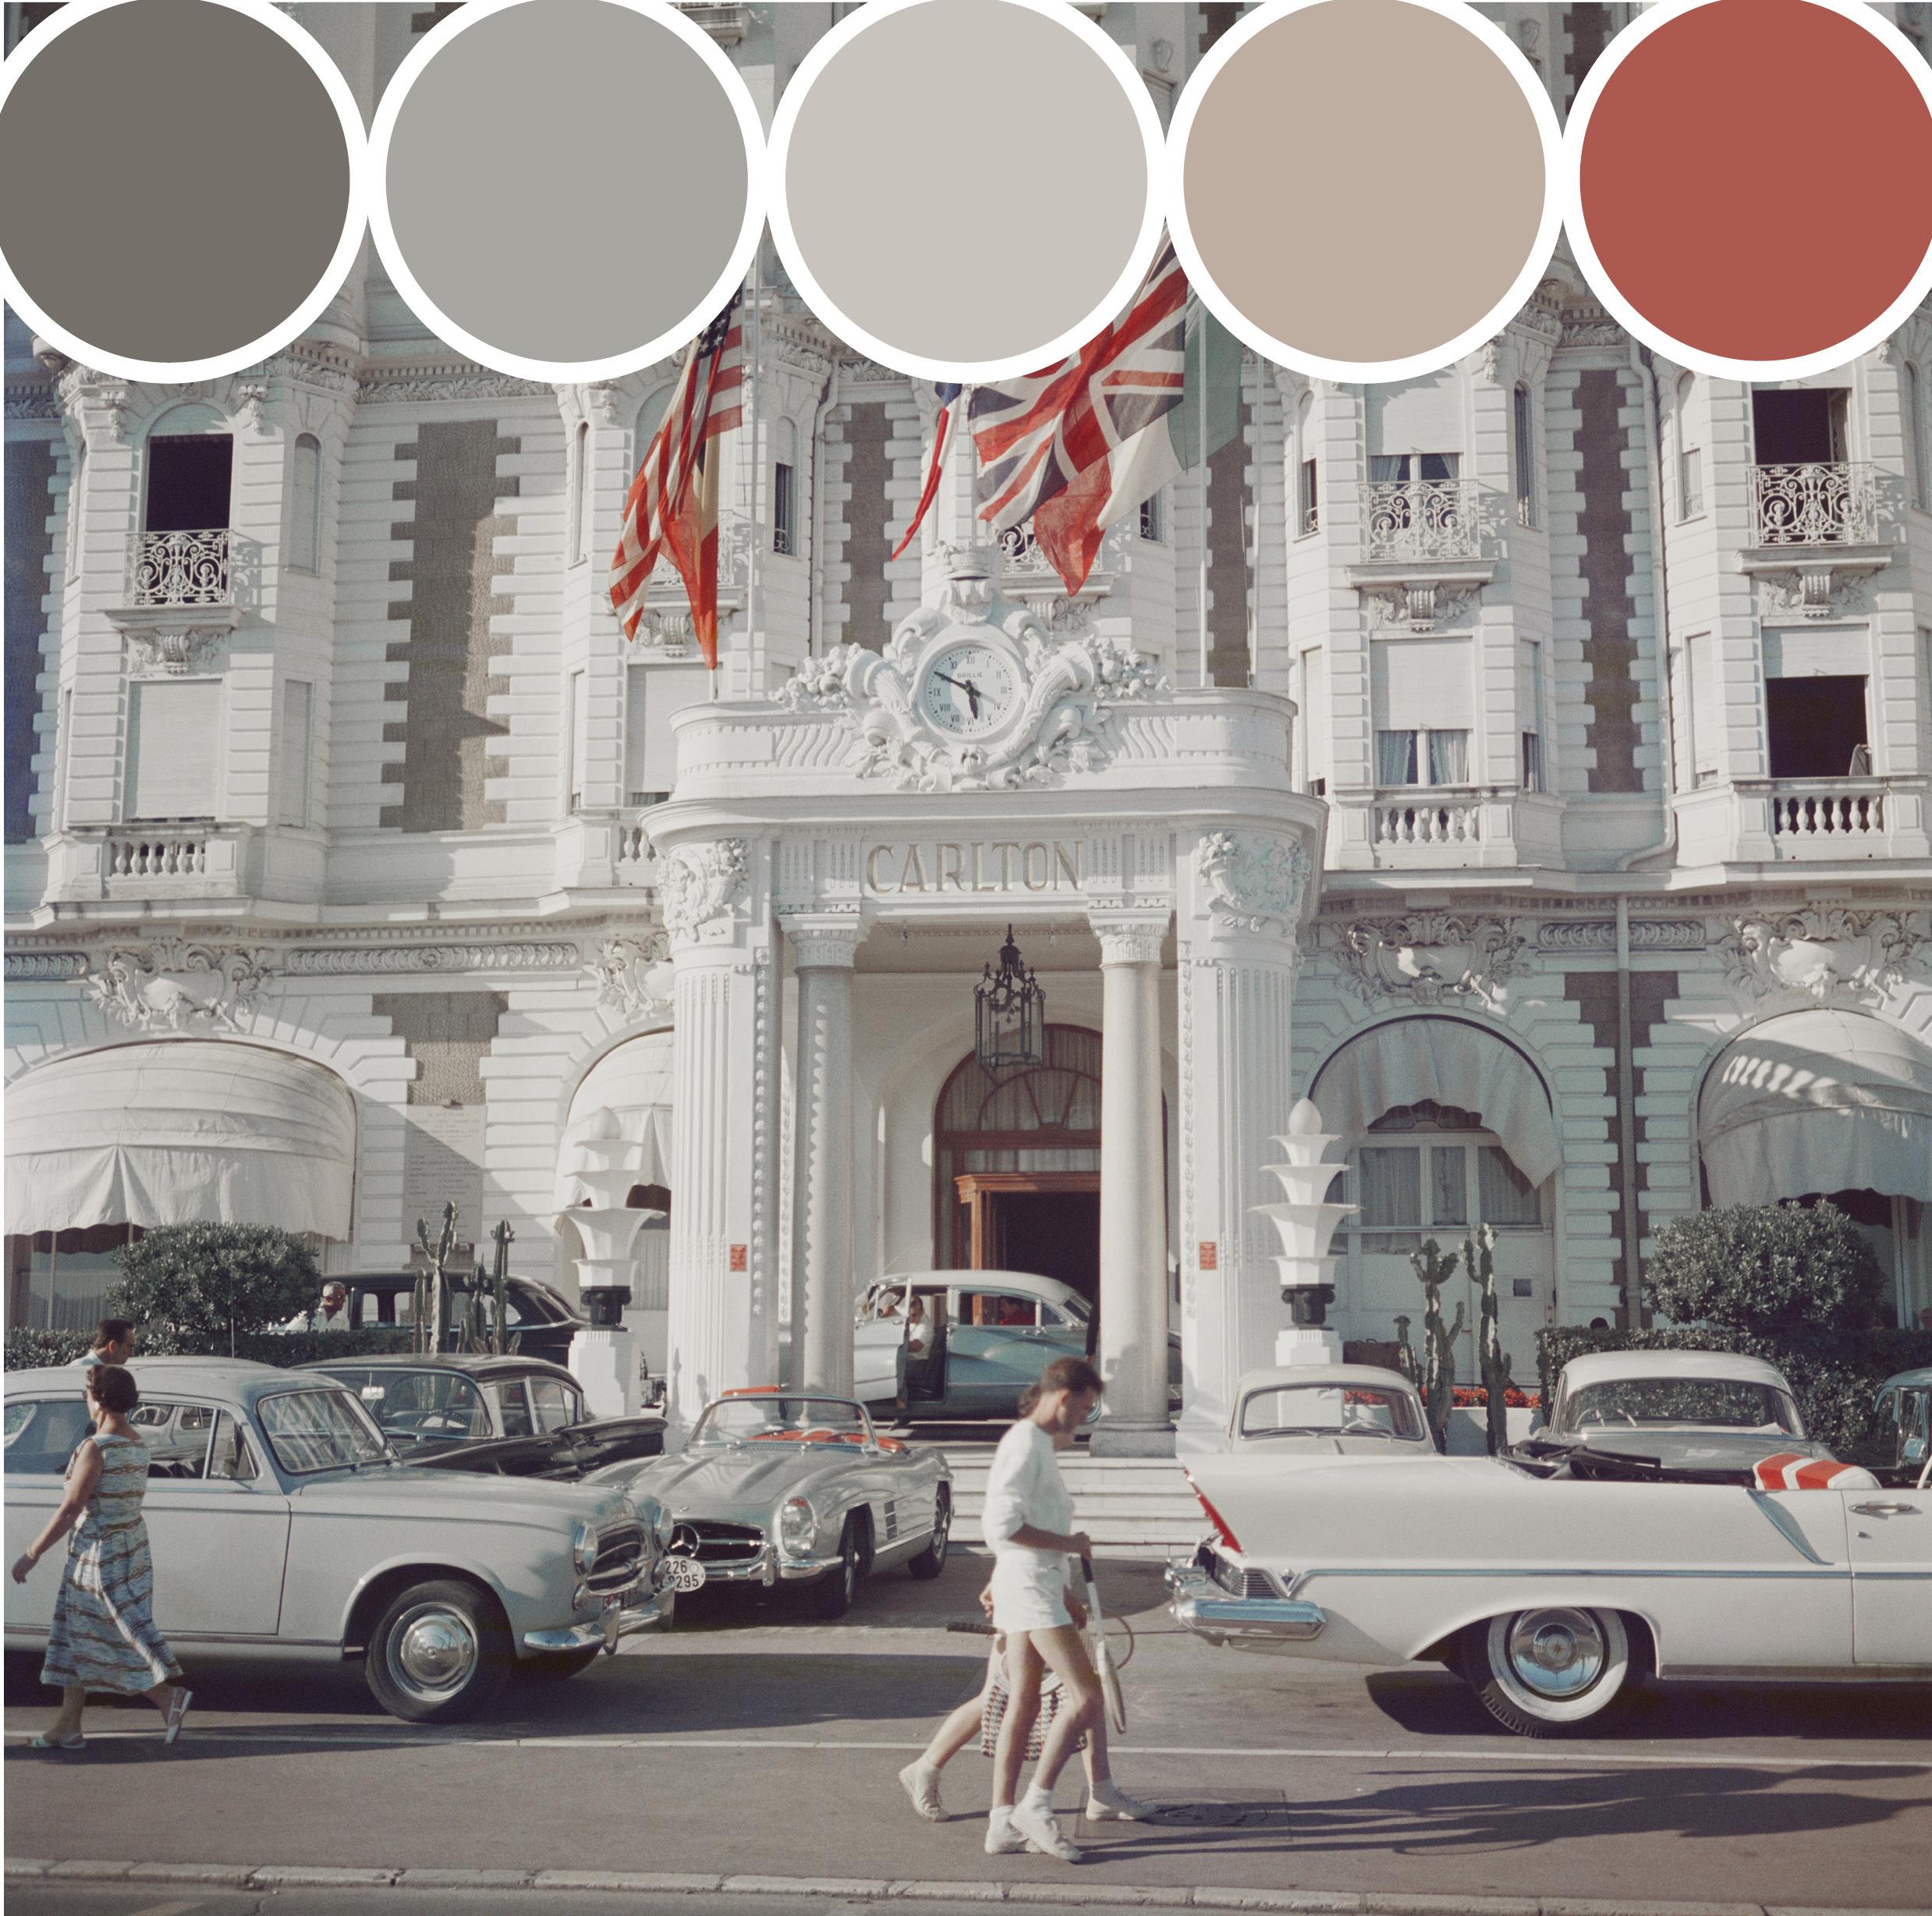 The entrance to the Carlton Hotel, Cannes, France, 1958. 

Slim Aarons
Carlton Hotel
Lambda Print
6 sizes available
Slim Aarons Estate Edition

60 x 60 inches
$5100

48 x 48 inches
$4500

40 x 40 inches
$3950

30 x 30 inches
$3350

20 x 20